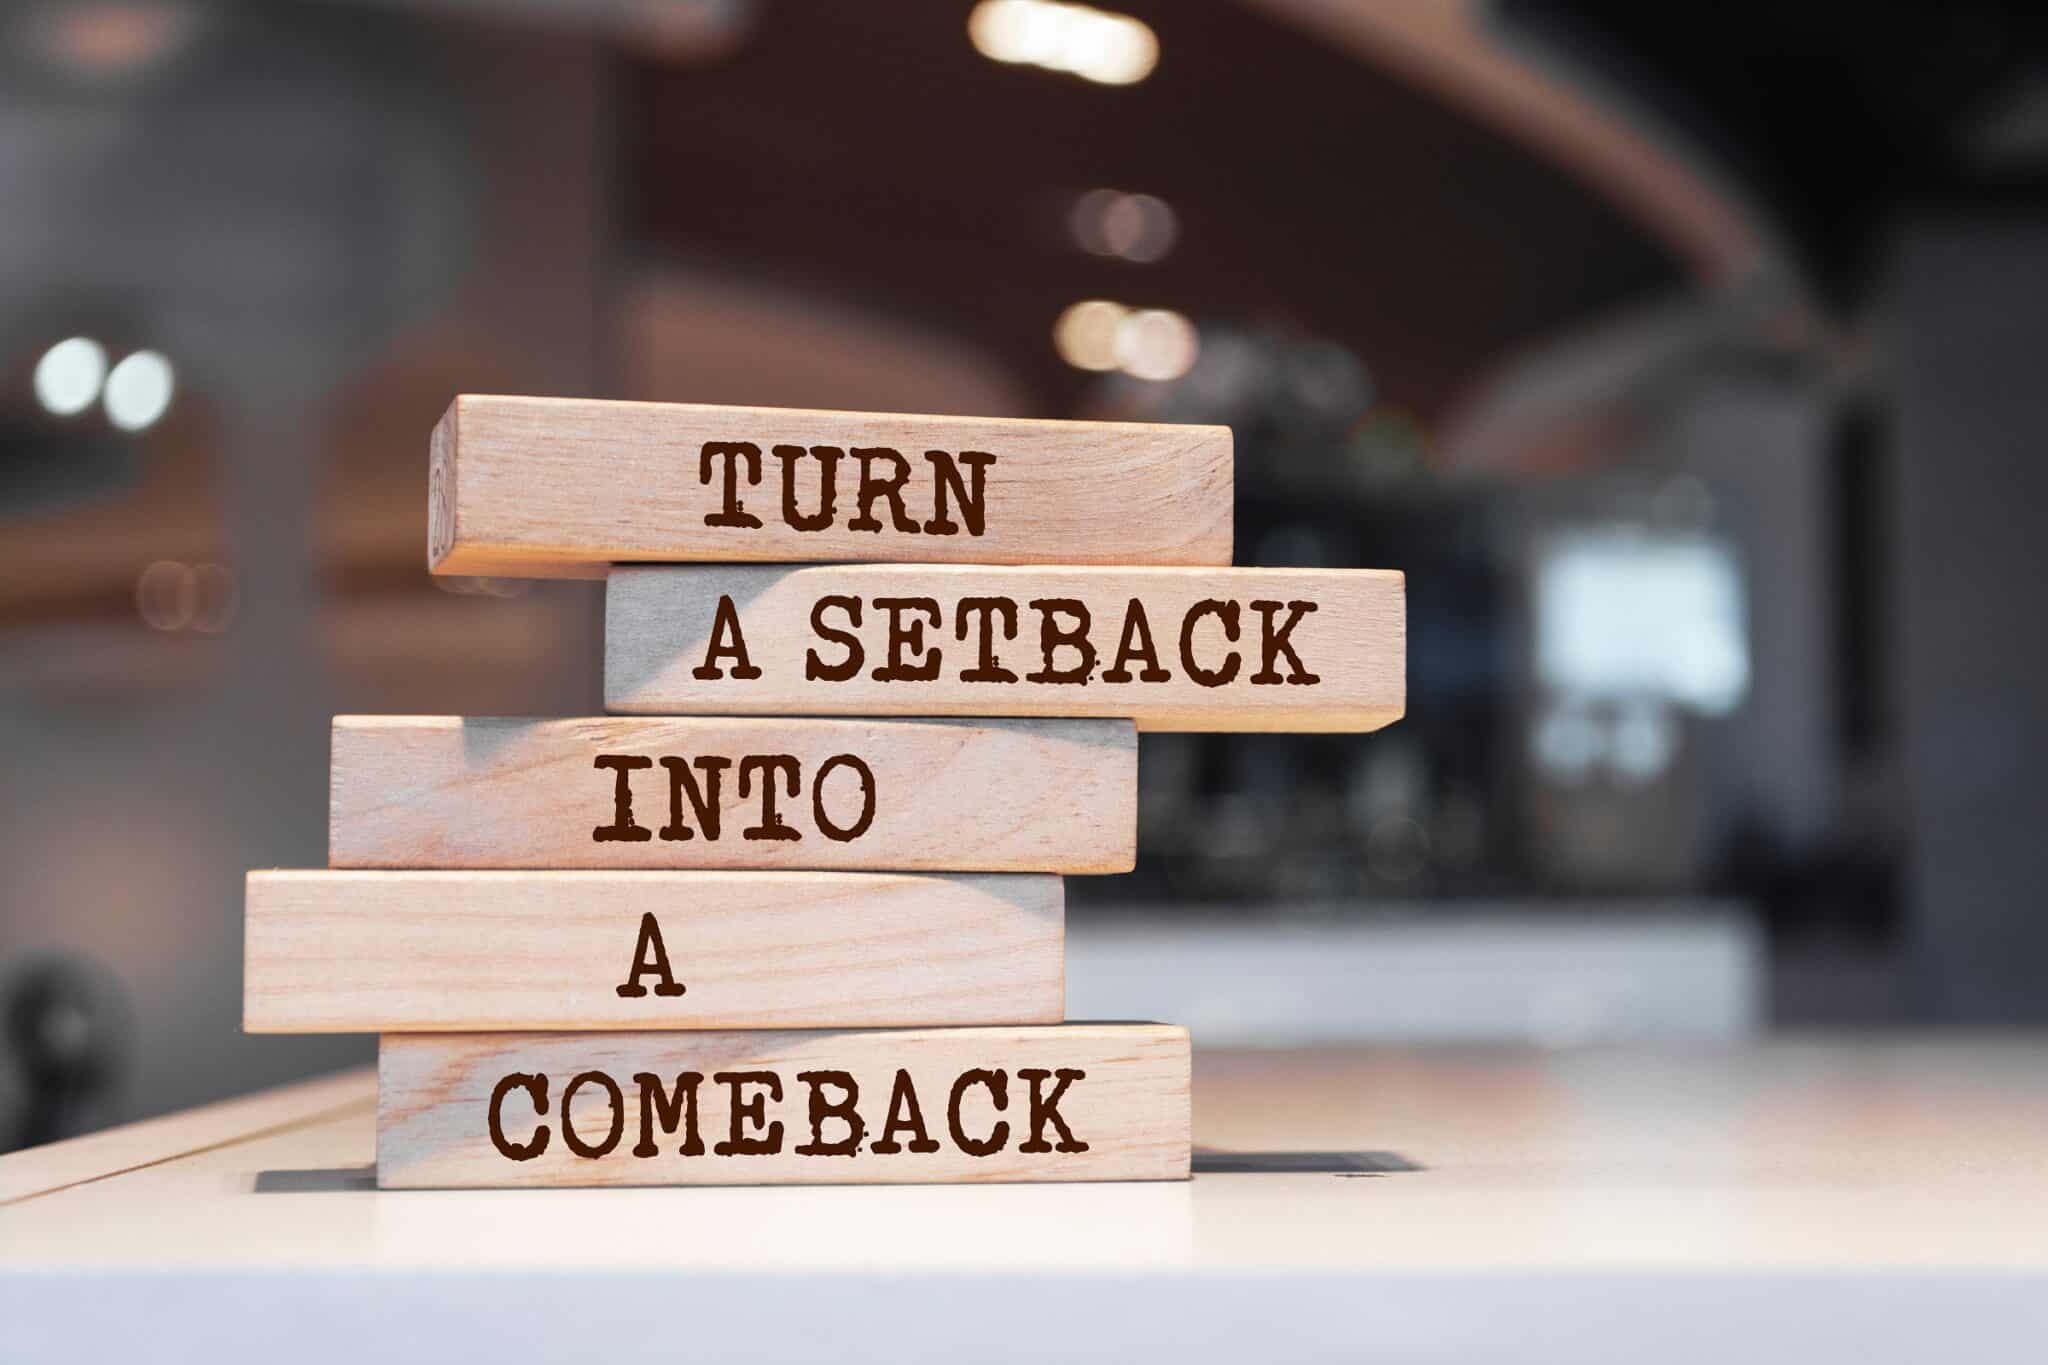 stacked blocks that read "turn a setback into a comeback"